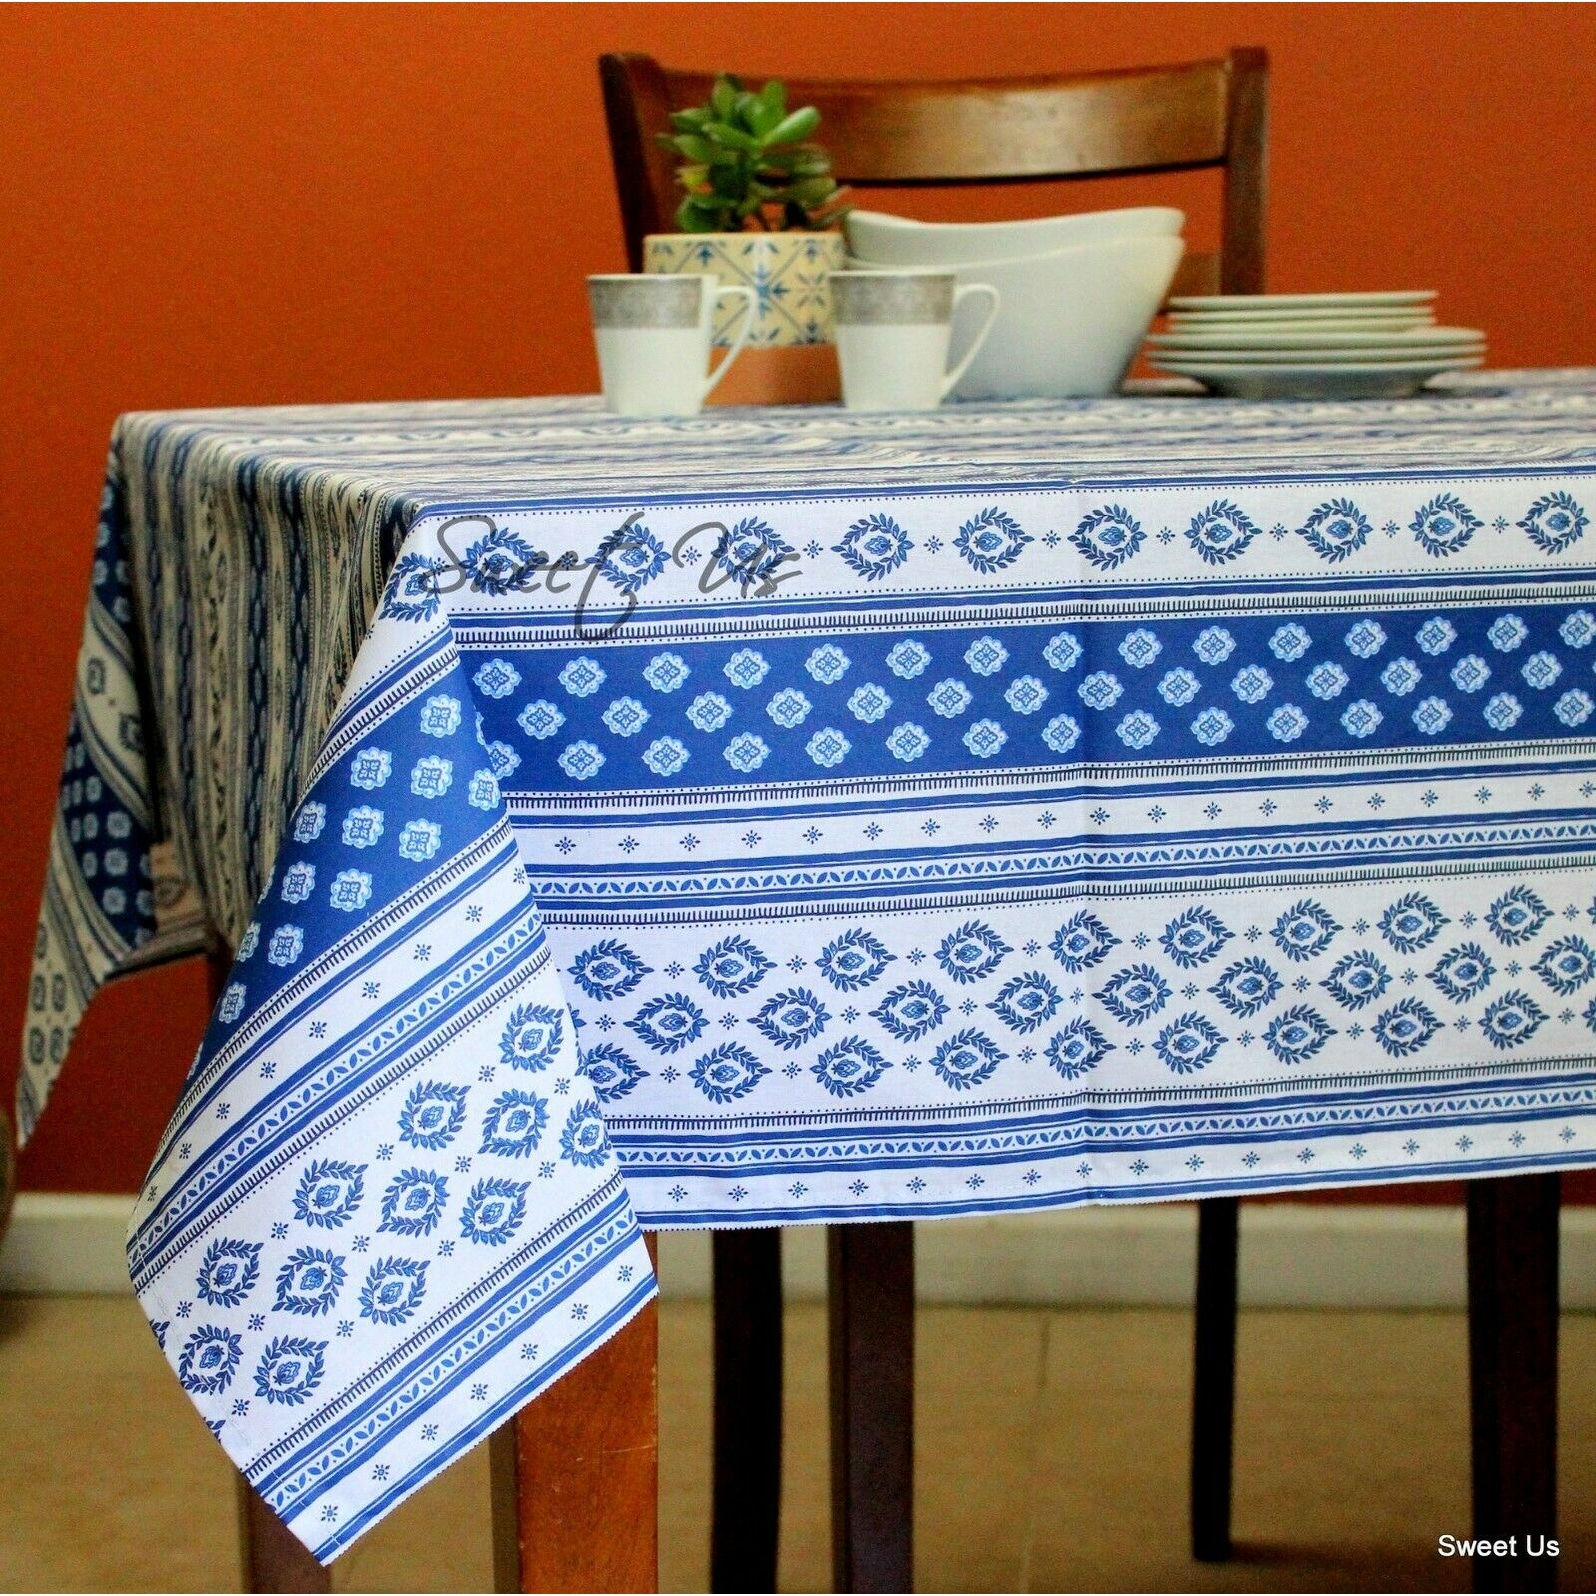 https://ak1.ostkcdn.com/images/products/is/images/direct/1e1fc887c28aecd423cbaf99fcec1ce7f9d026c8/Wipeable-Stain-Resistant-French-Chateau-Cotton-Floral-Tablecloth.jpg